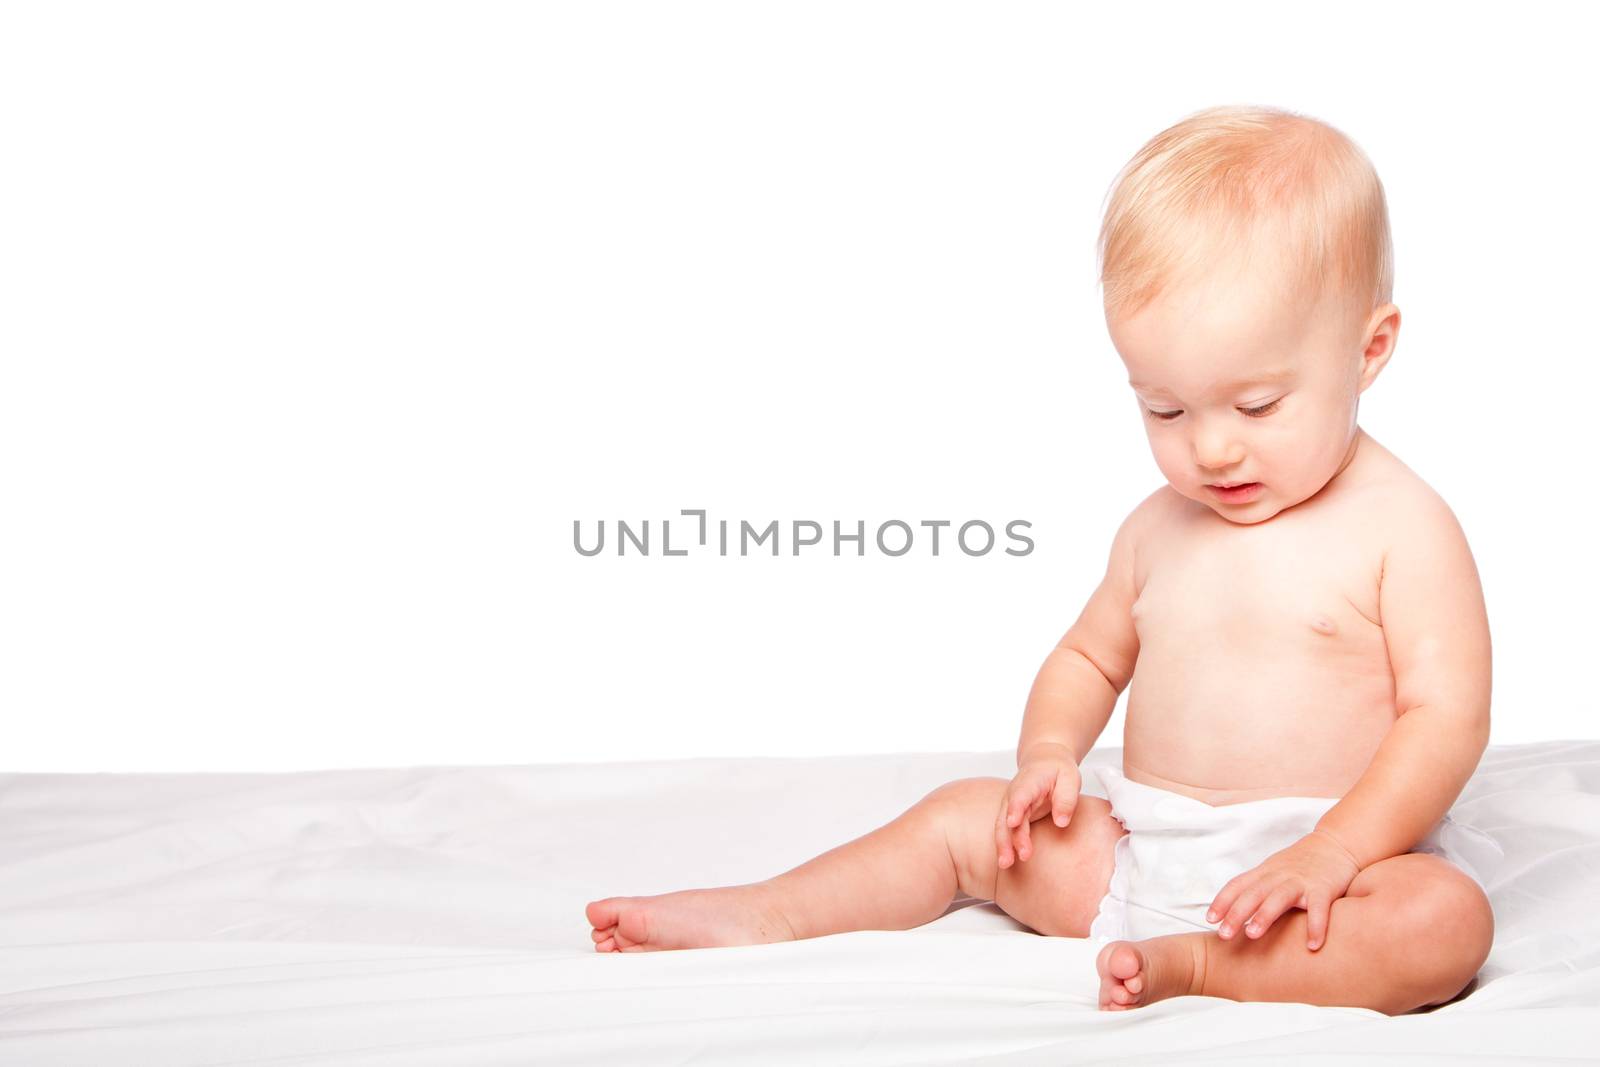 Cute adorable infant baby sitting alone, on white.